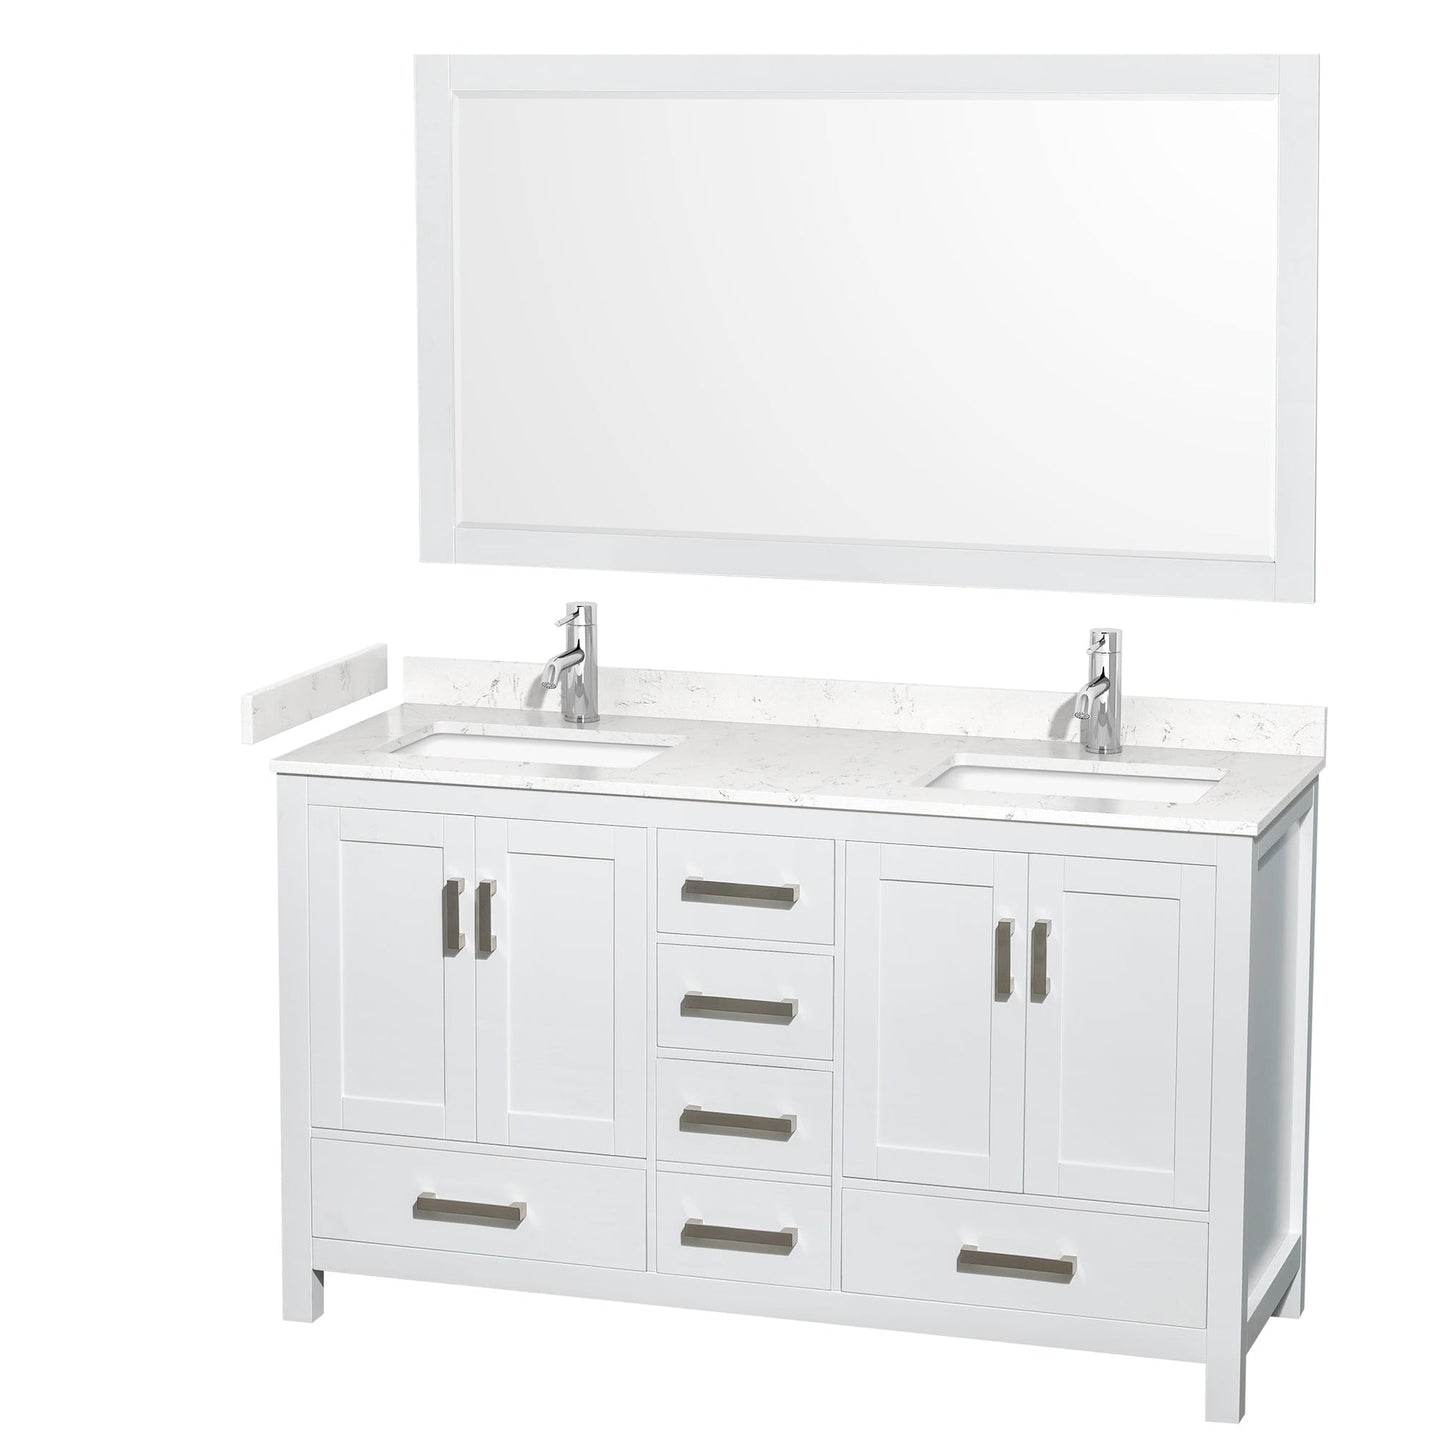 Wyndham Collection Sheffield 60" Double Bathroom Vanity in White, Carrara Cultured Marble Countertop, Undermount Square Sinks, 58" Mirror